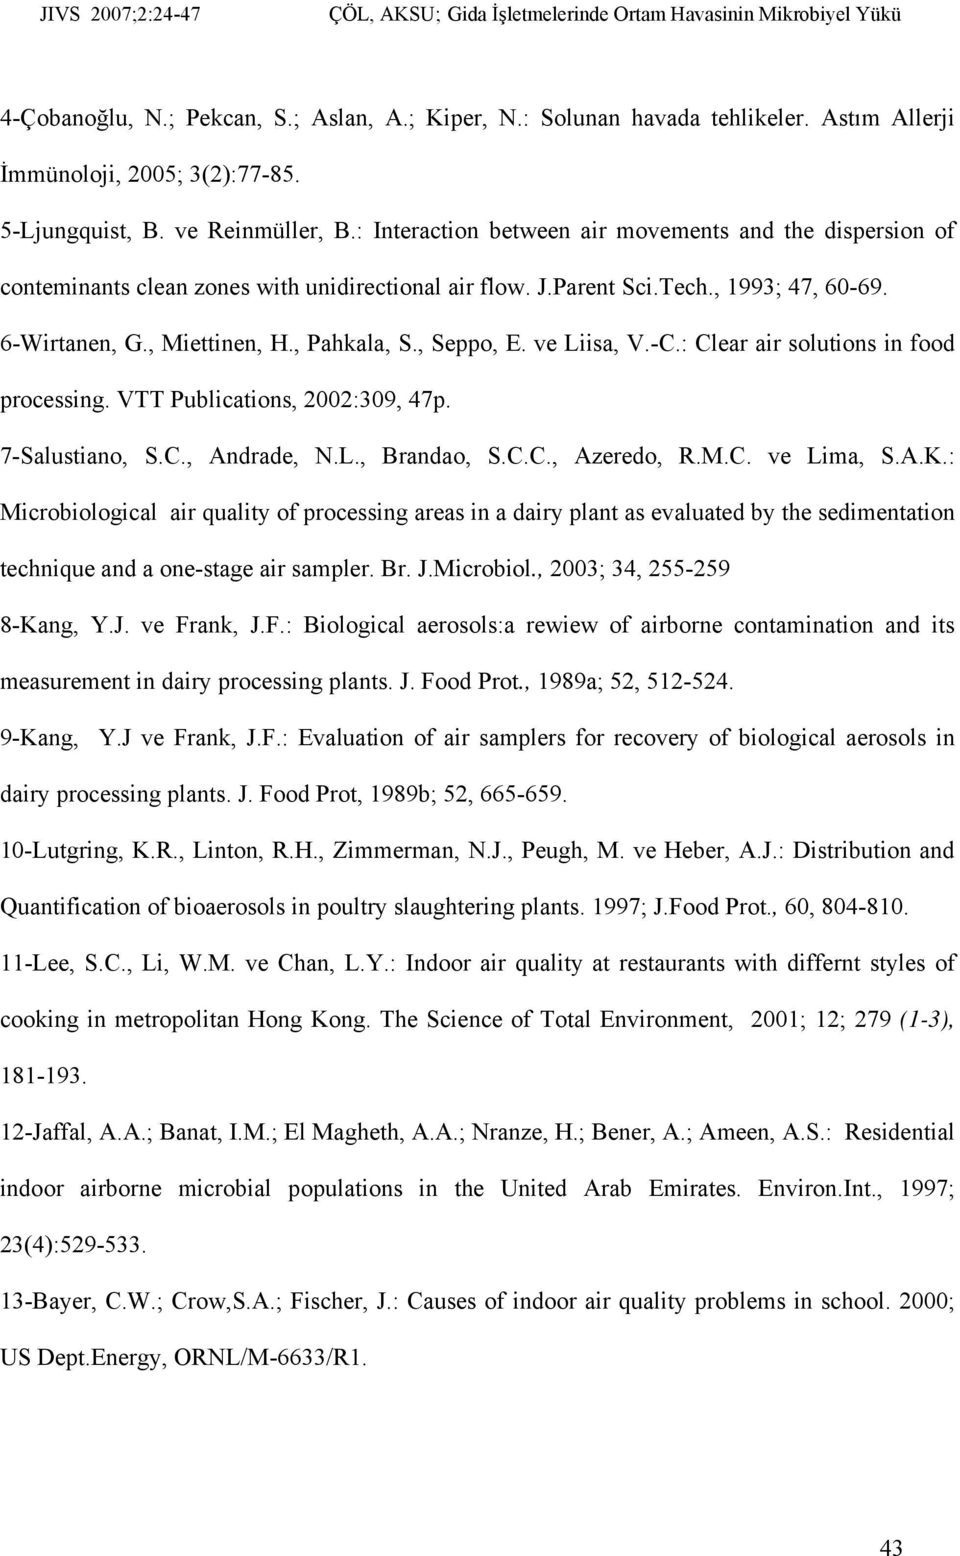 , Seppo, E. ve Liisa, V.-C.: Clear air solutions in food processing. VTT Publications, 2002:309, 47p. 7-Salustiano, S.C., Andrade, N.L., Brandao, S.C.C., Azeredo, R.M.C. ve Lima, S.A.K.